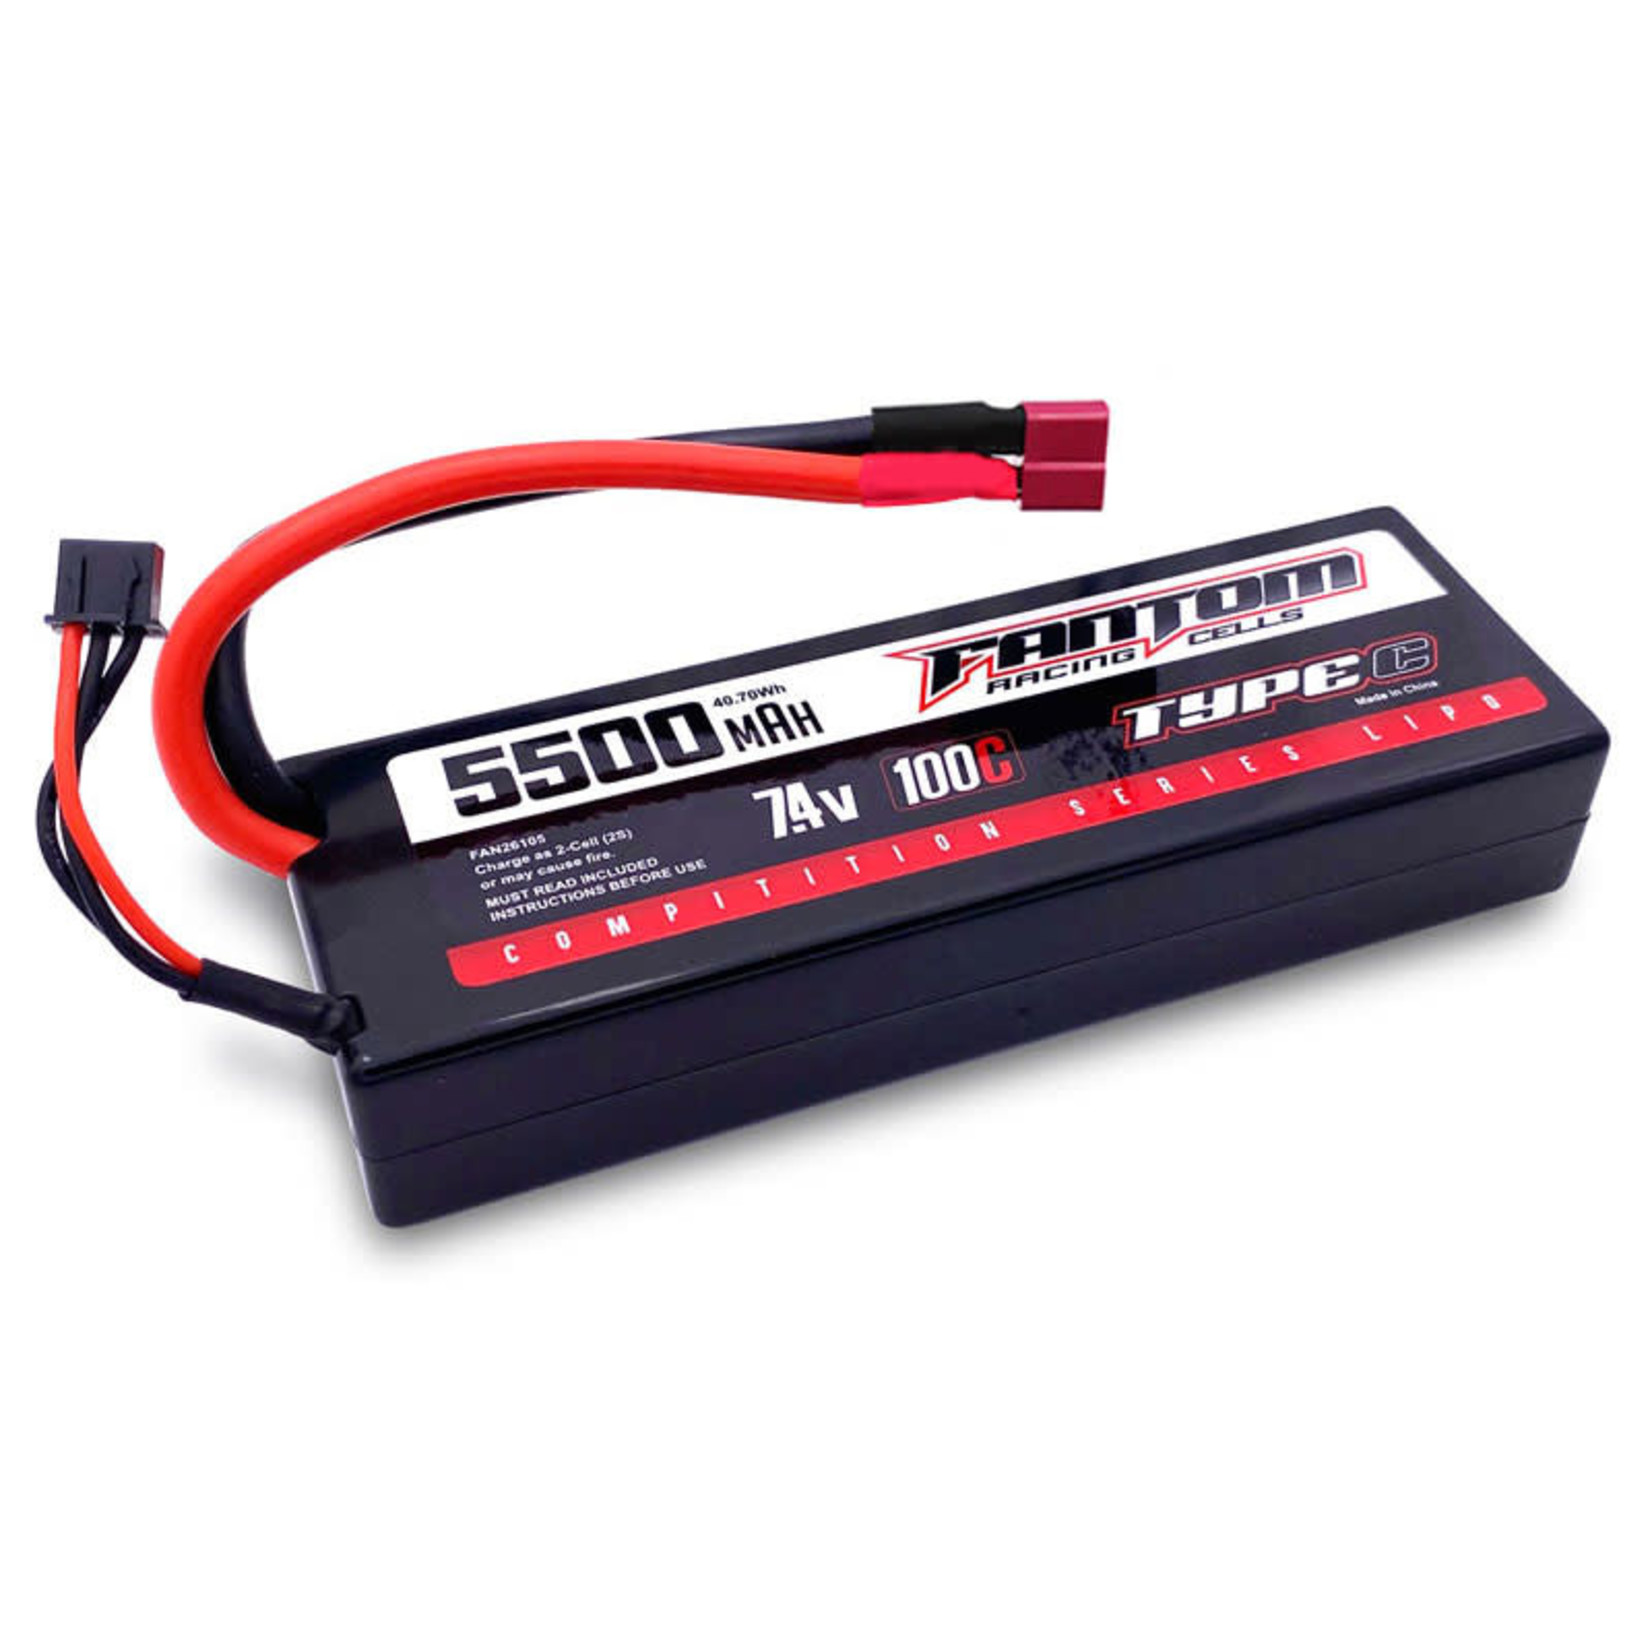 FANTOM RACING 100C COMPETITION SERIES LiPo – 5500mAh, 7.4v, 2-Cell, Deans Connector